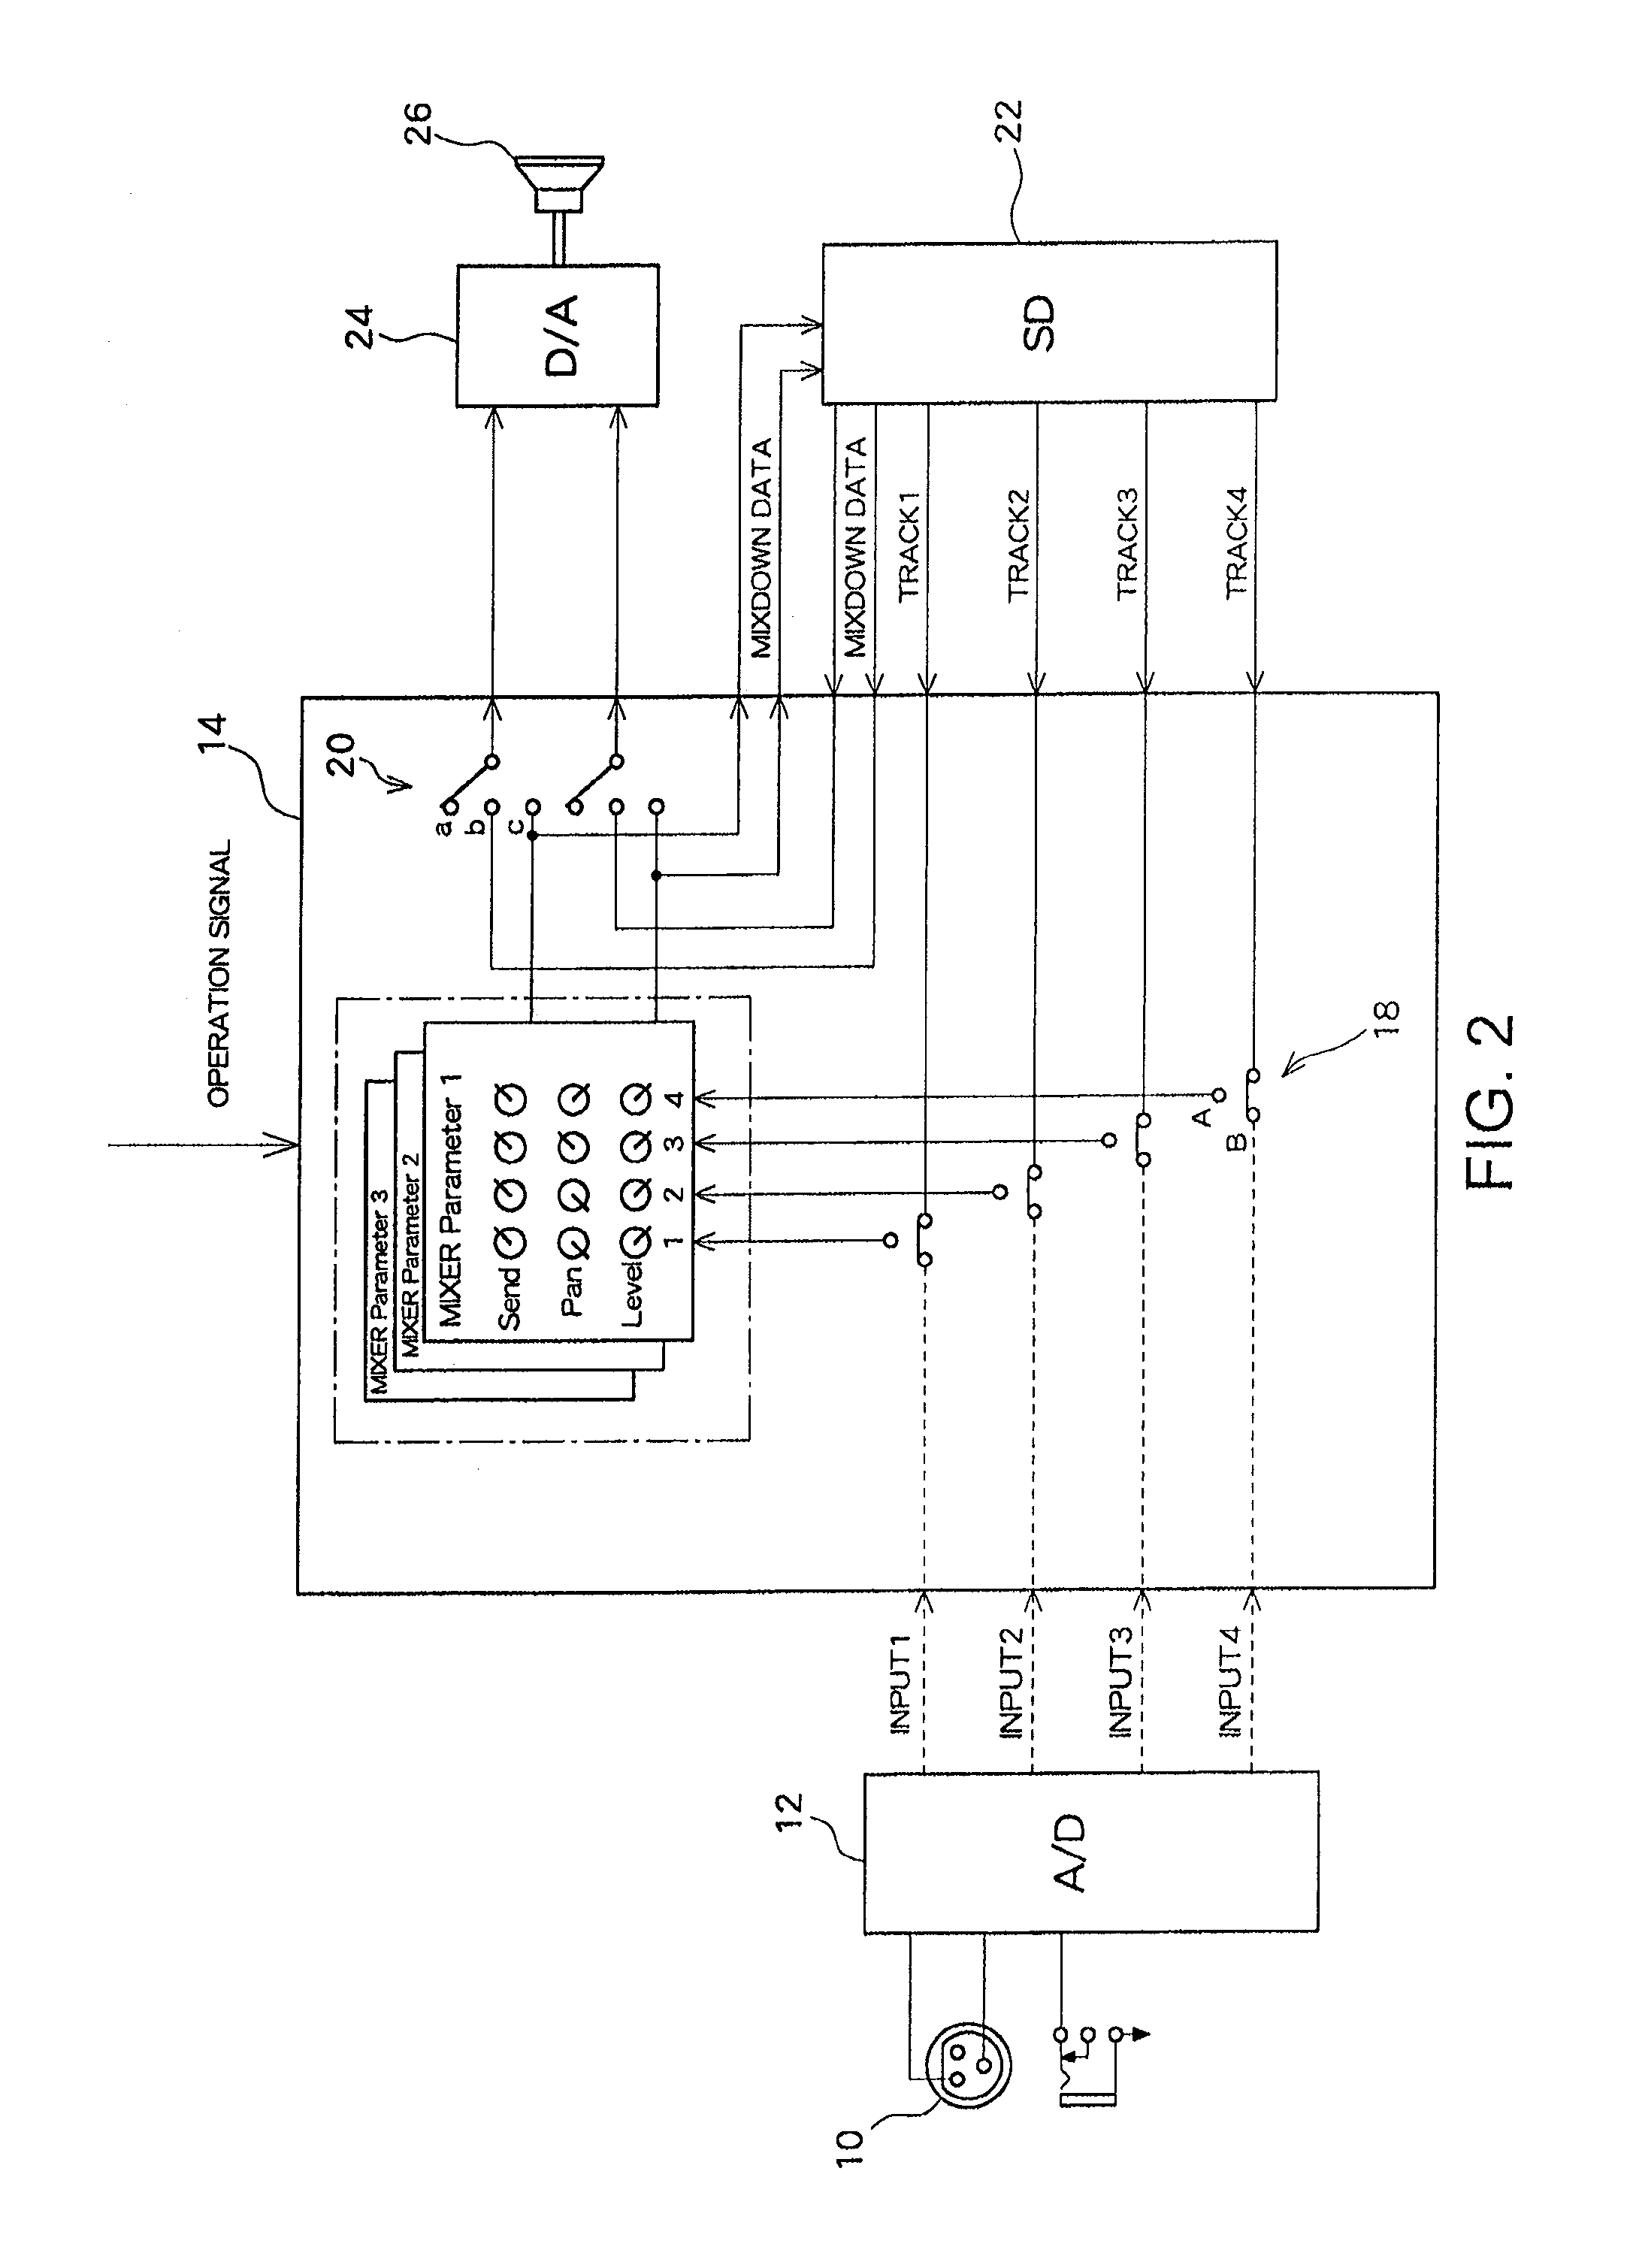 Multitrack recorder and mixdown method